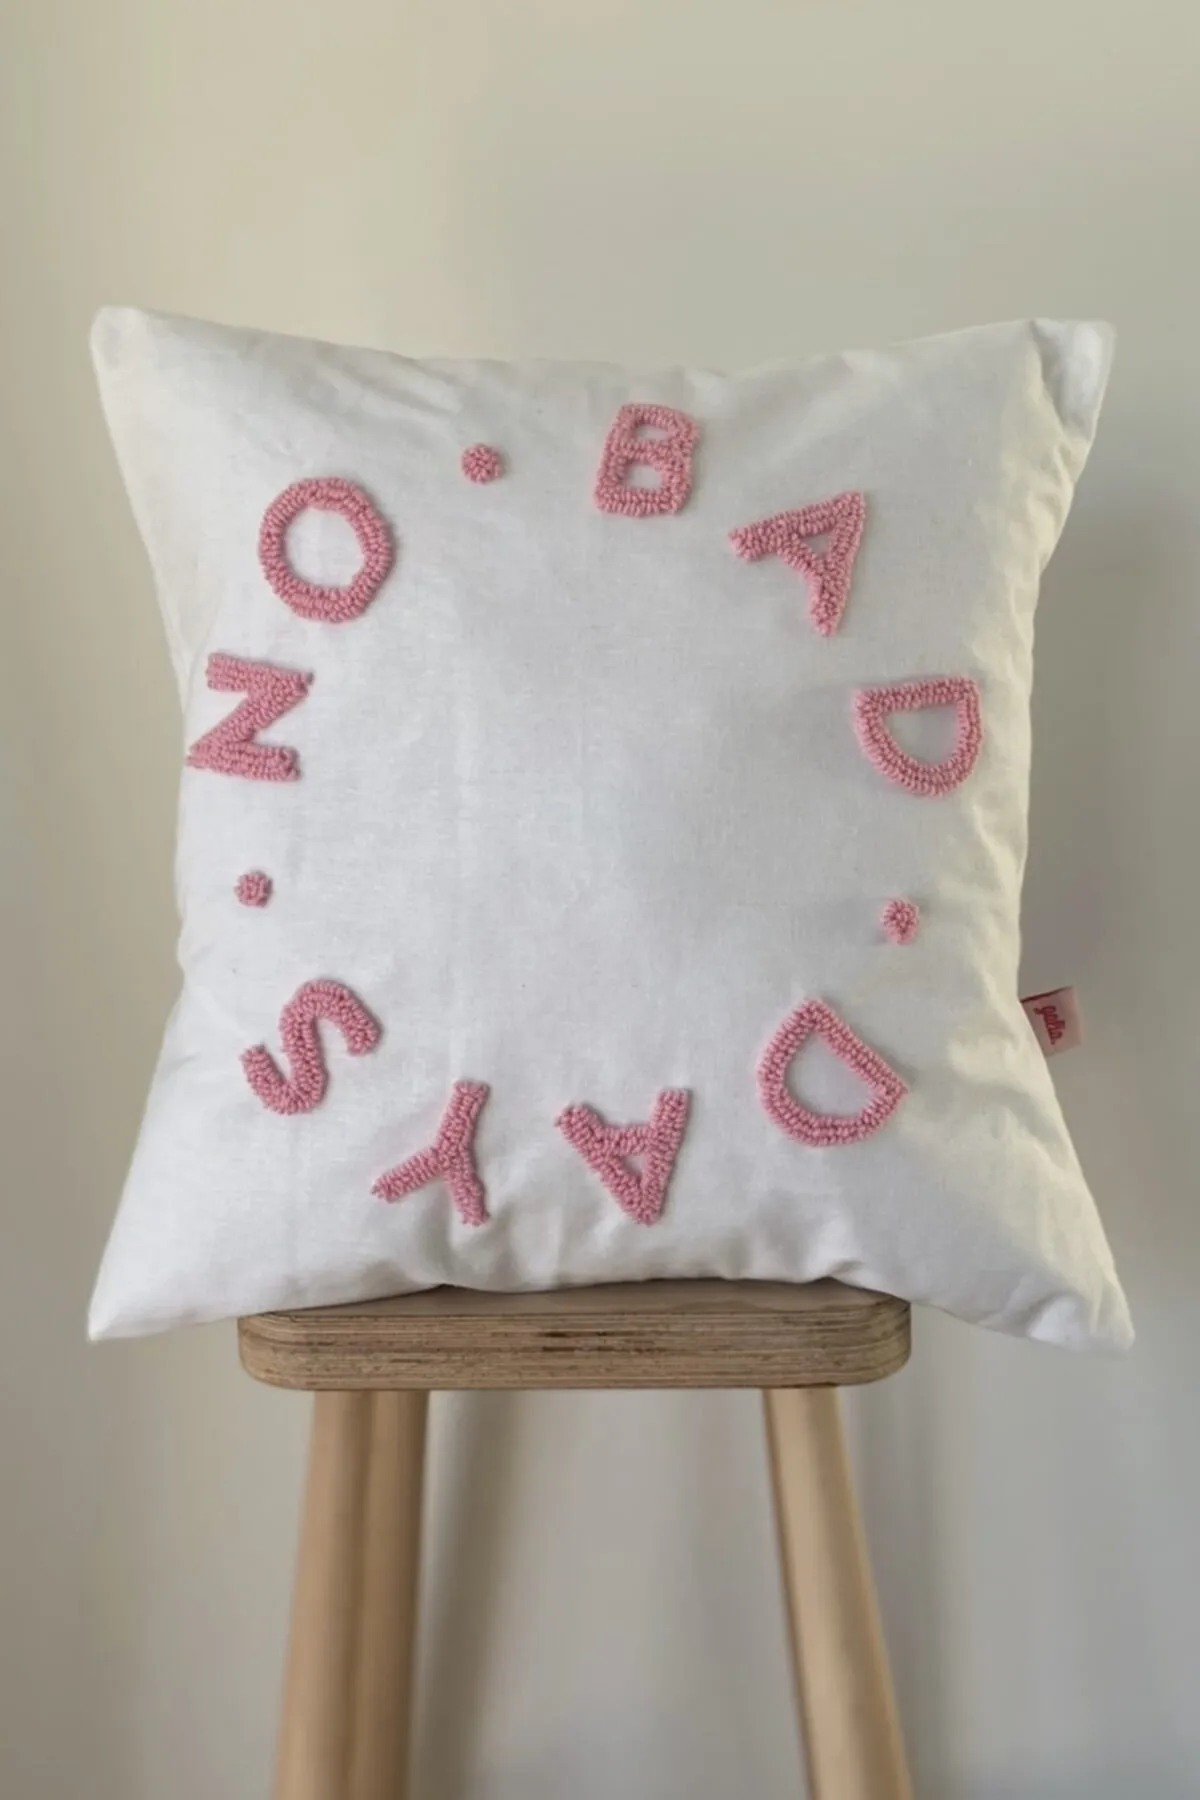 No Bad Days Motto Pink Punch Cushion Pillow Cover